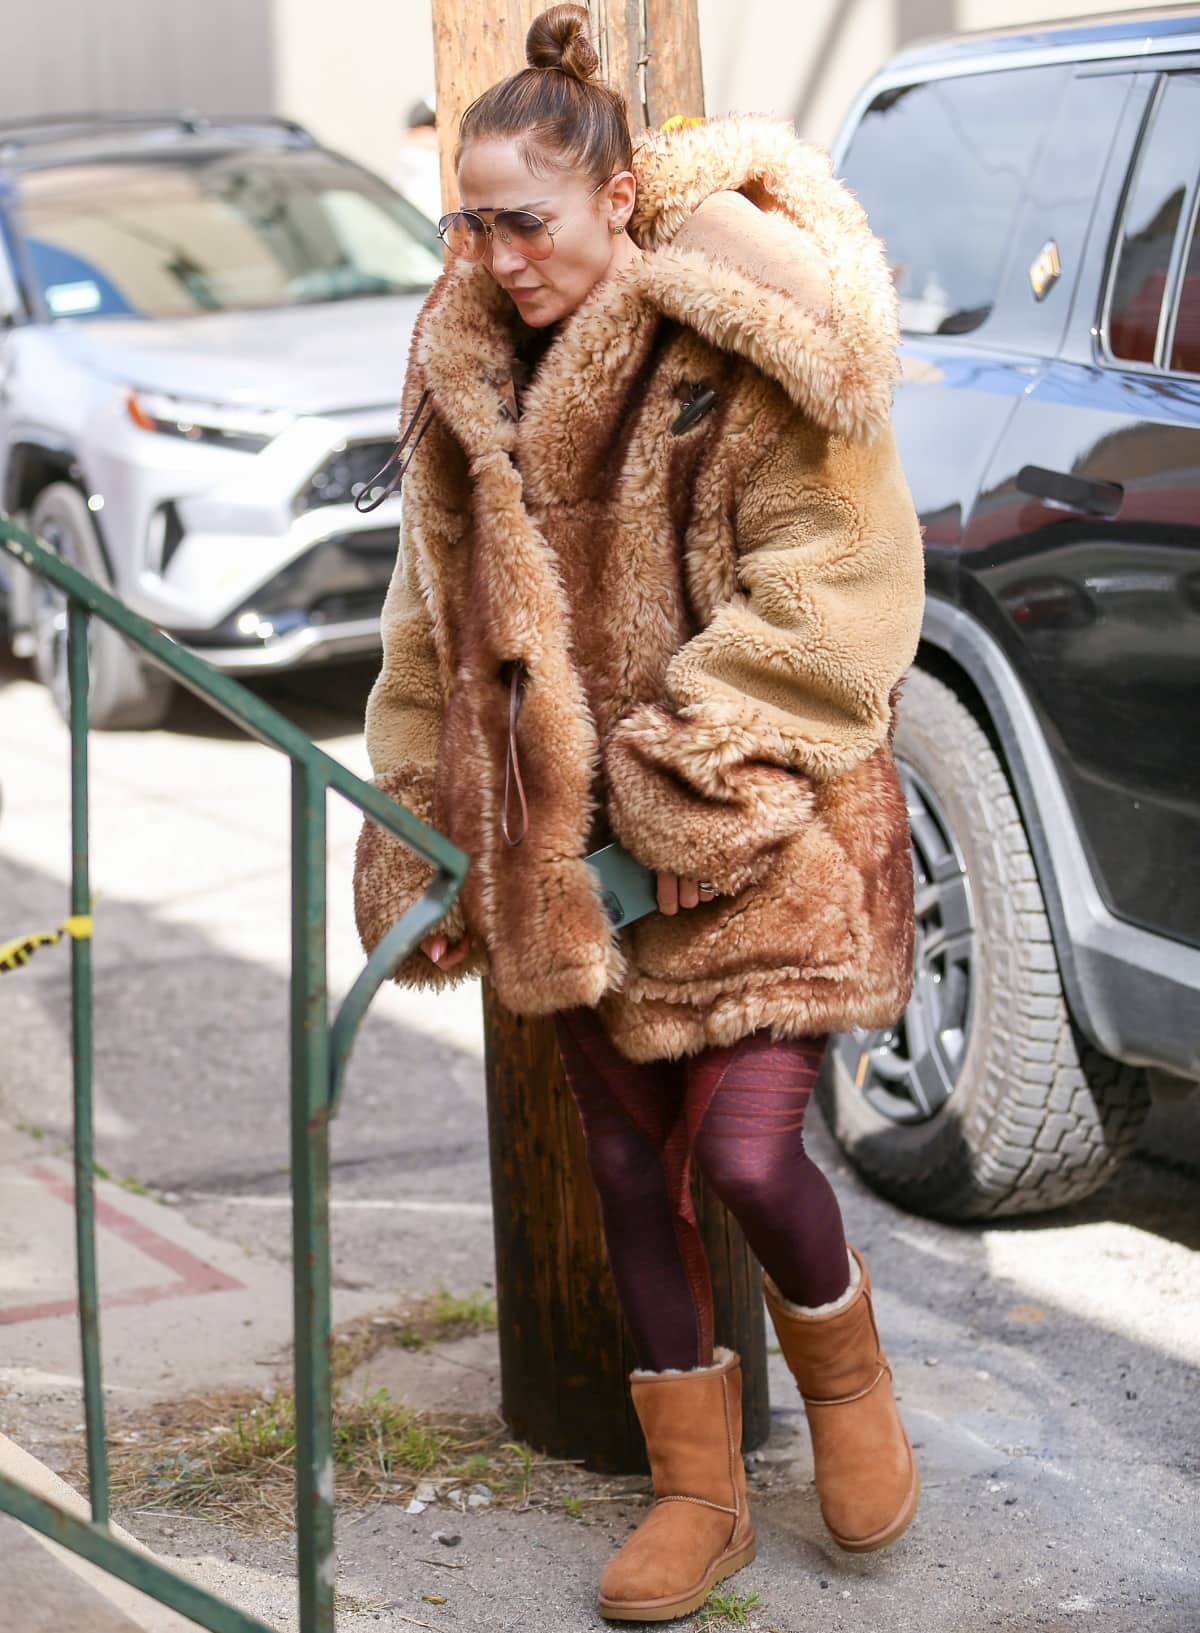 Jennifer Lopez keeping herself warm in a furry coat and Ugg boots while out and about in Los Angeles